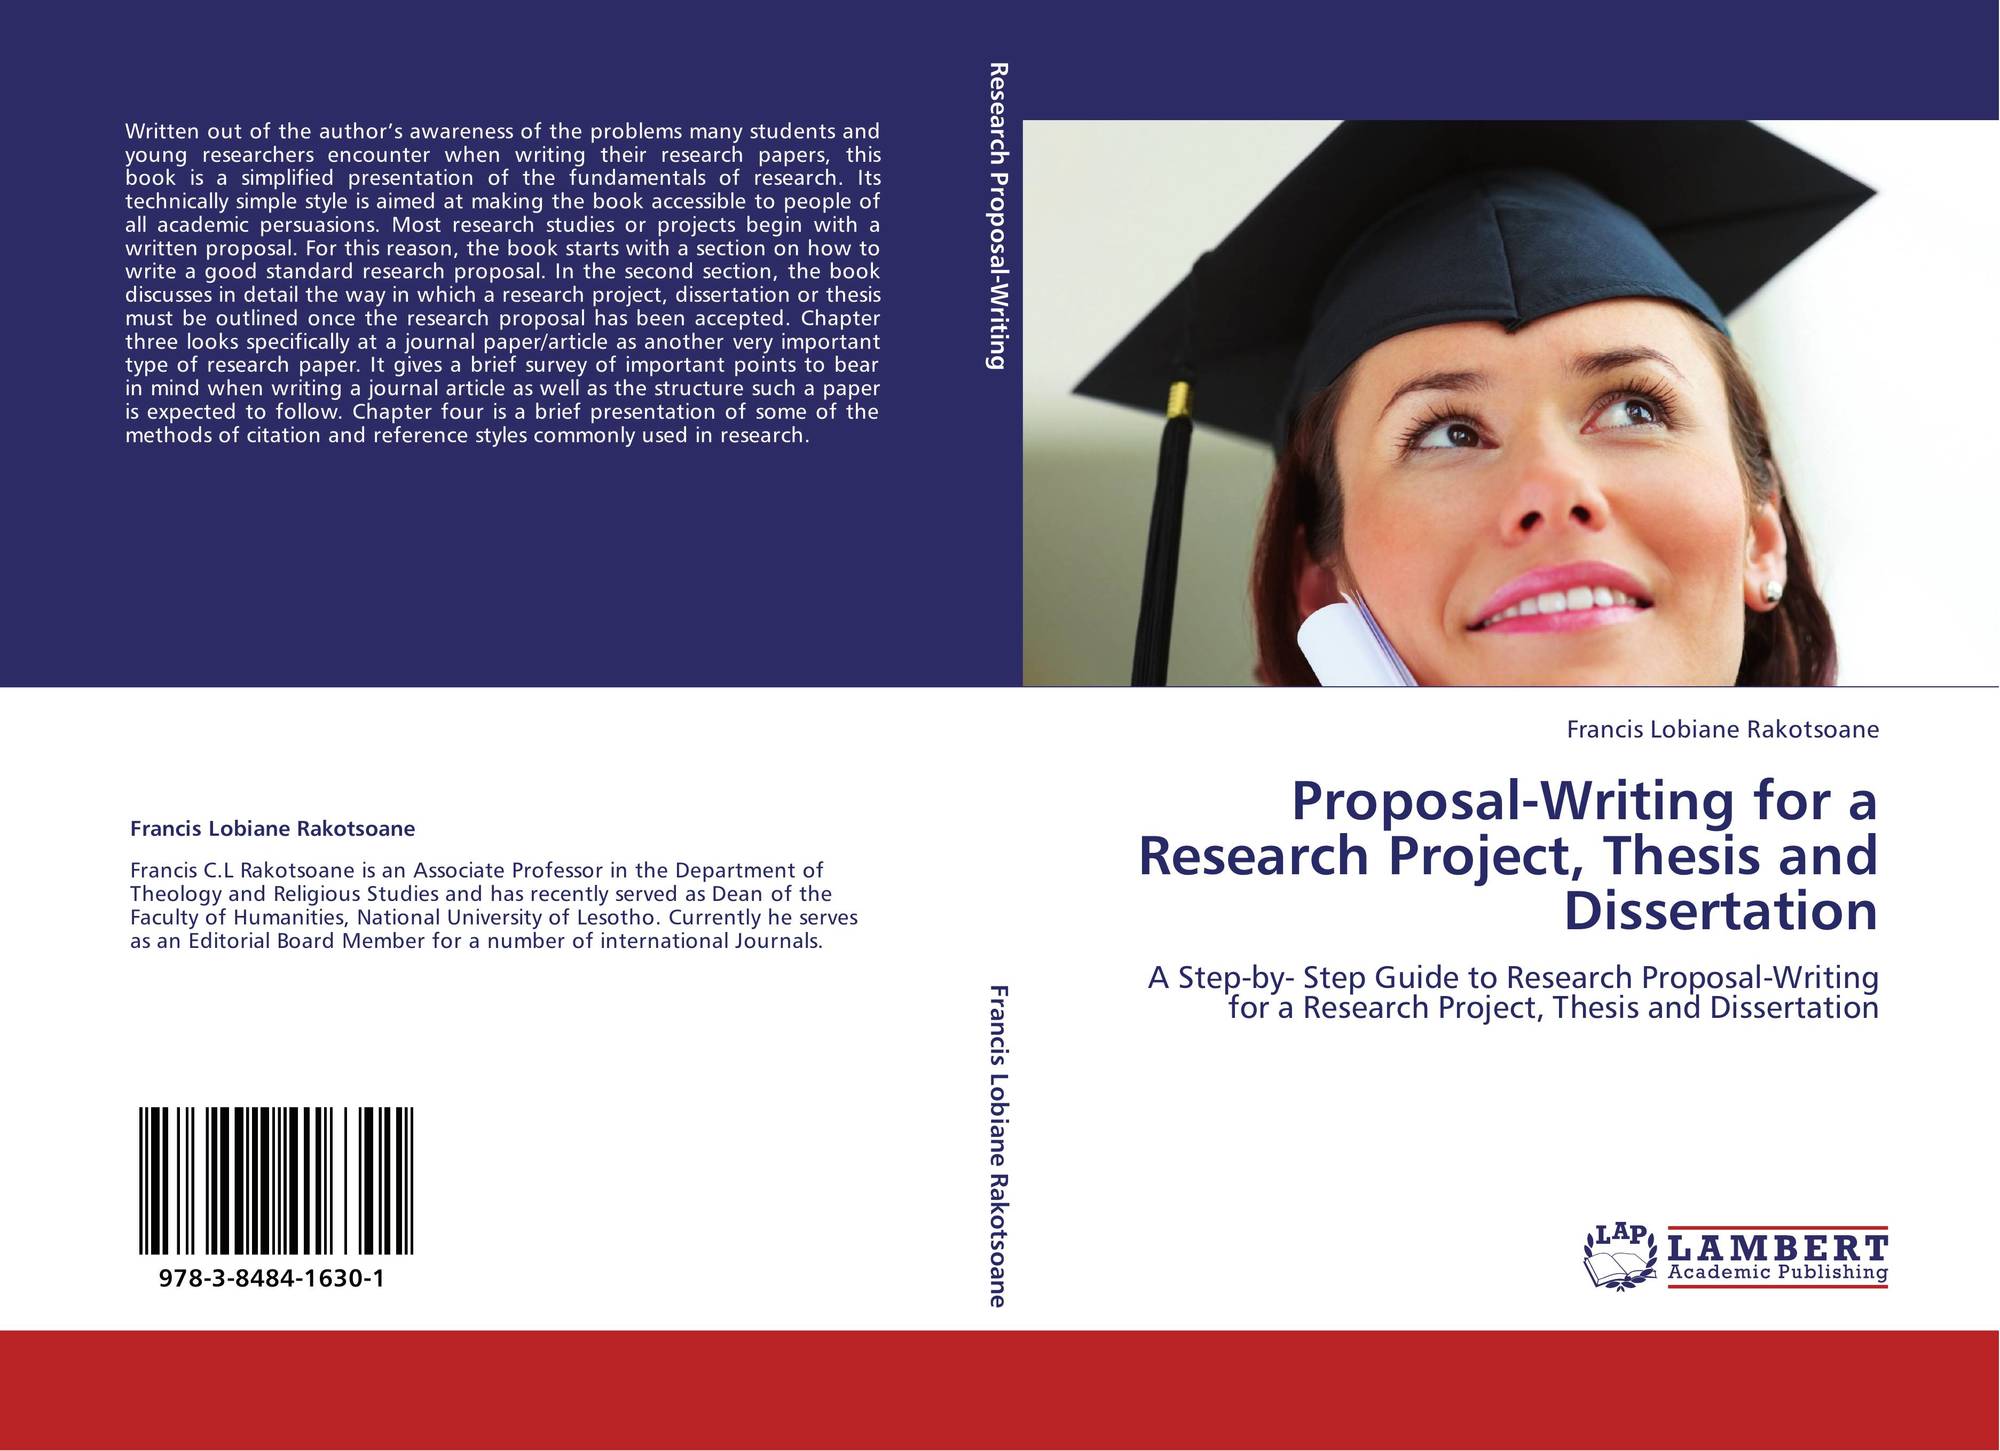 Planning and conducting a dissertation research project